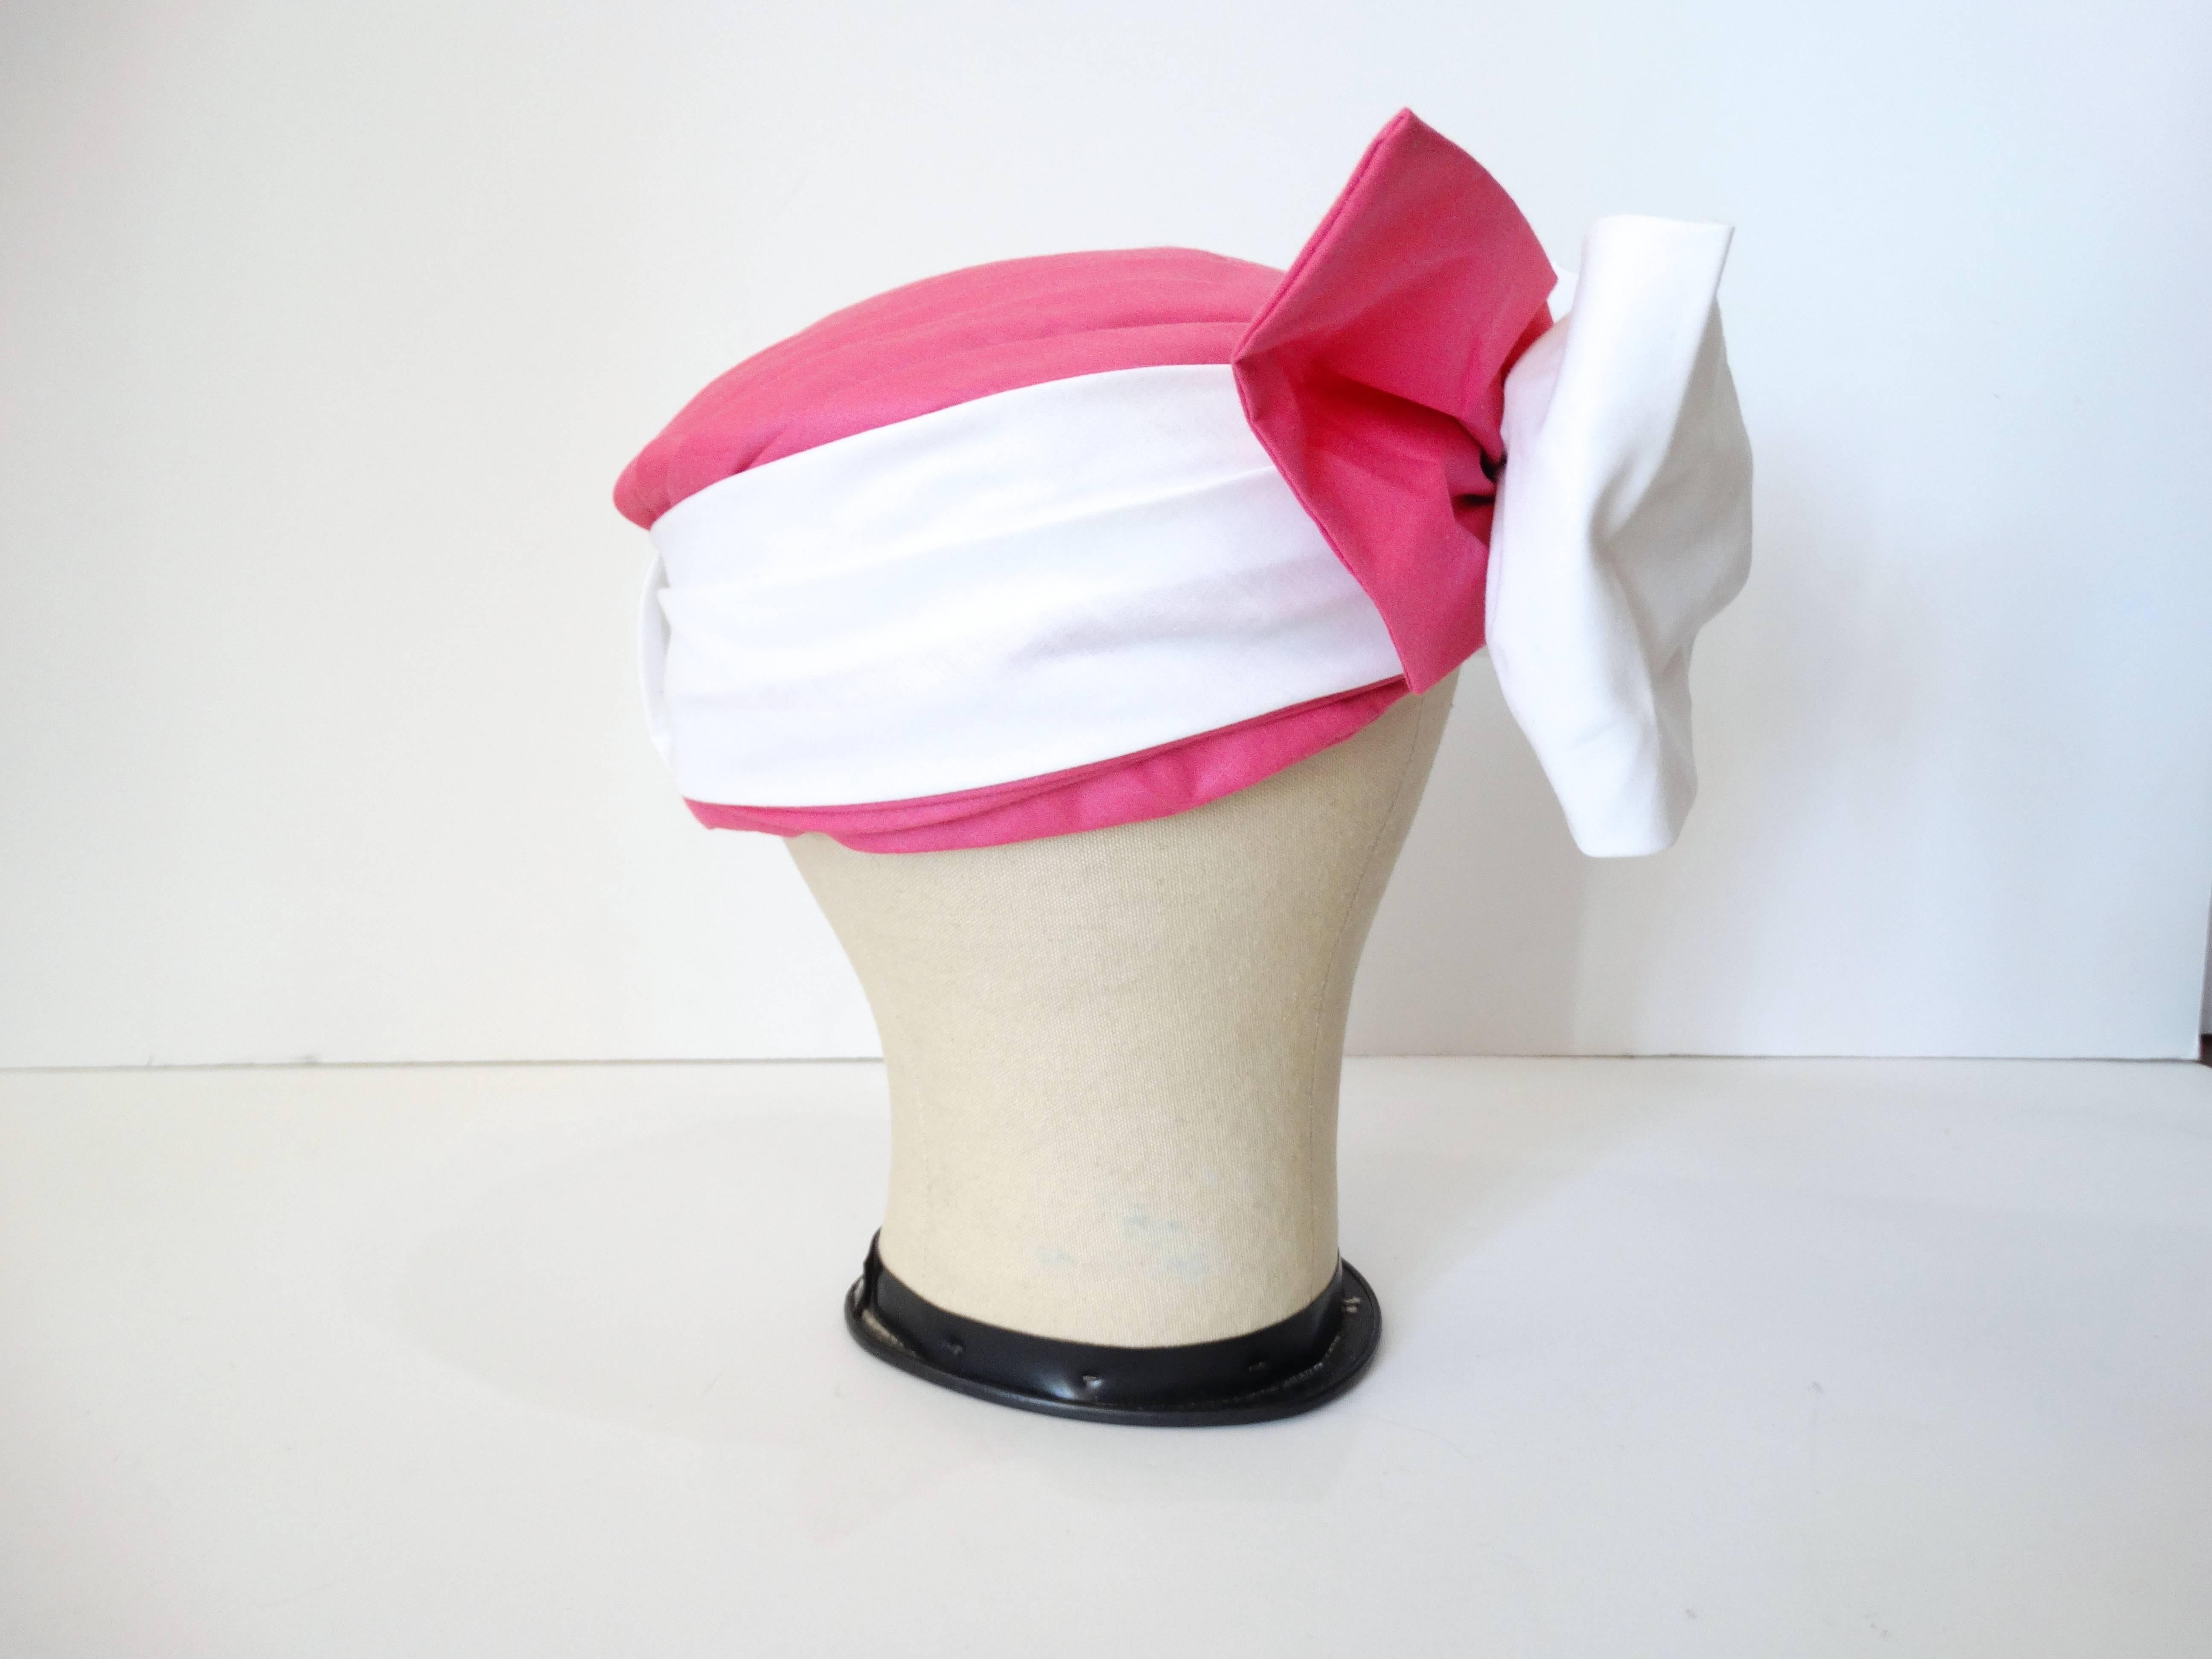 Sweet Yves Saint Laurent Rare vintage Turban style hat with large bow. I believe silk or a cotton blend, this hat is lightweight and the inside is lined with netting. measures approx. 21